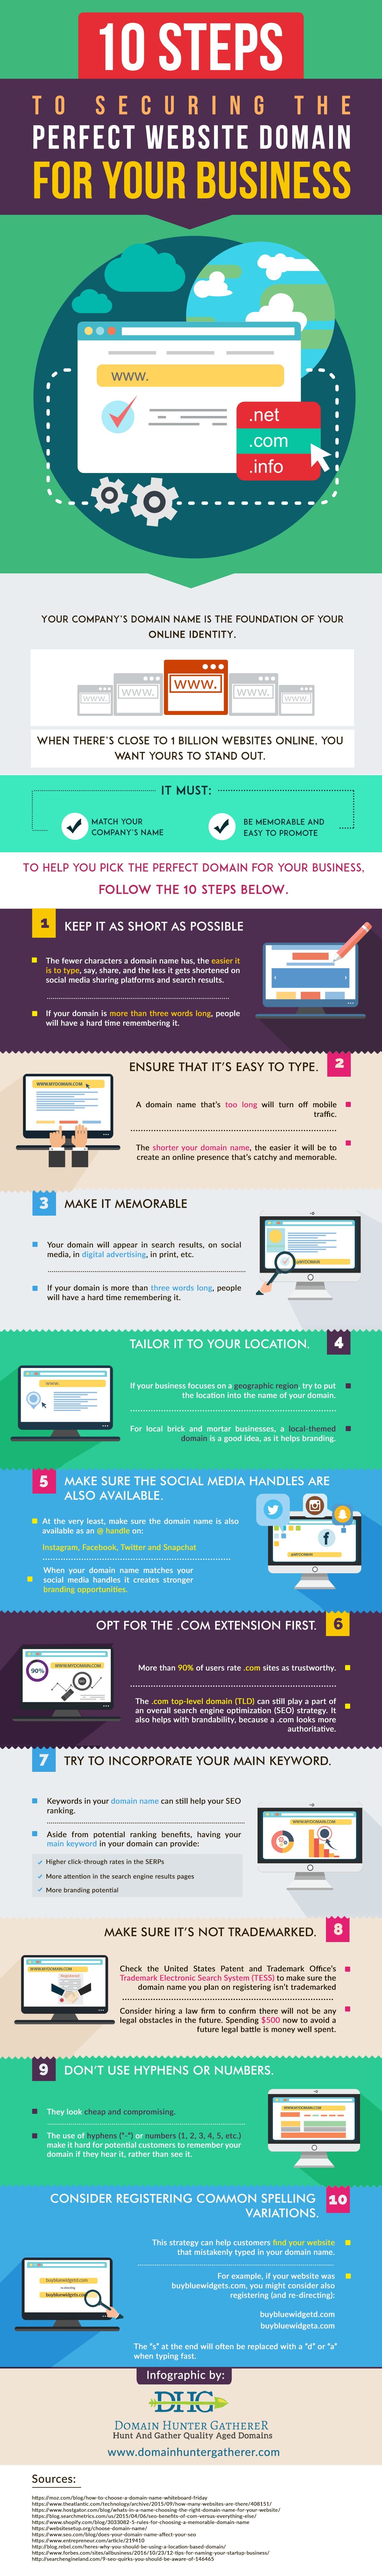 The 10-Step Method to Getting the Best Domain Name for Your Business – Infographic